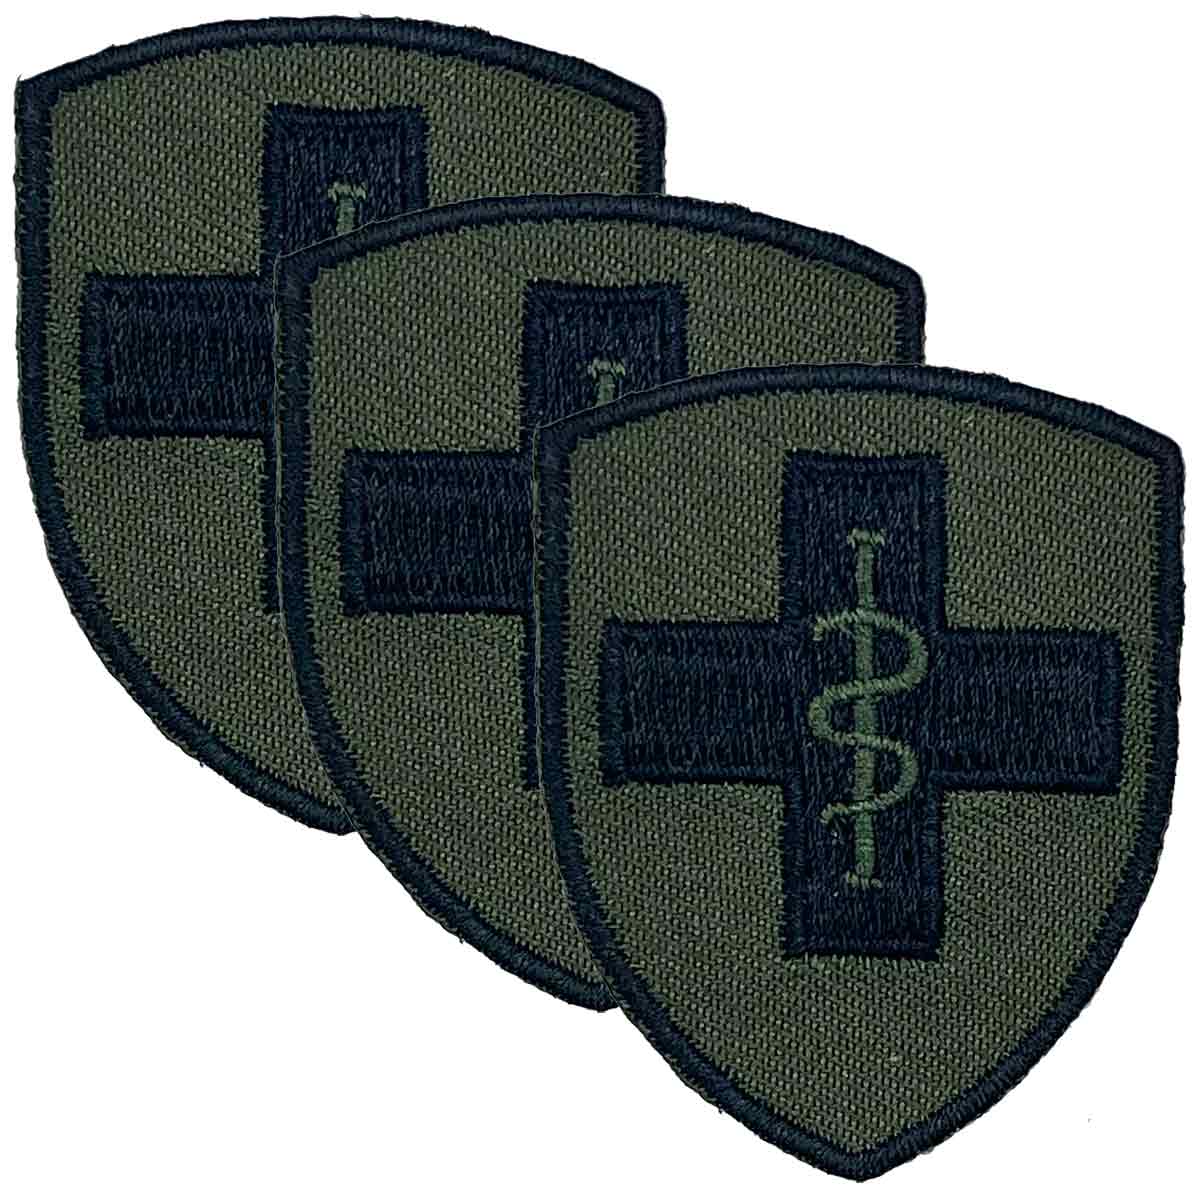 2 Medical Brigade TRF - Iron or Sewn On Patch - John Bull Clothing